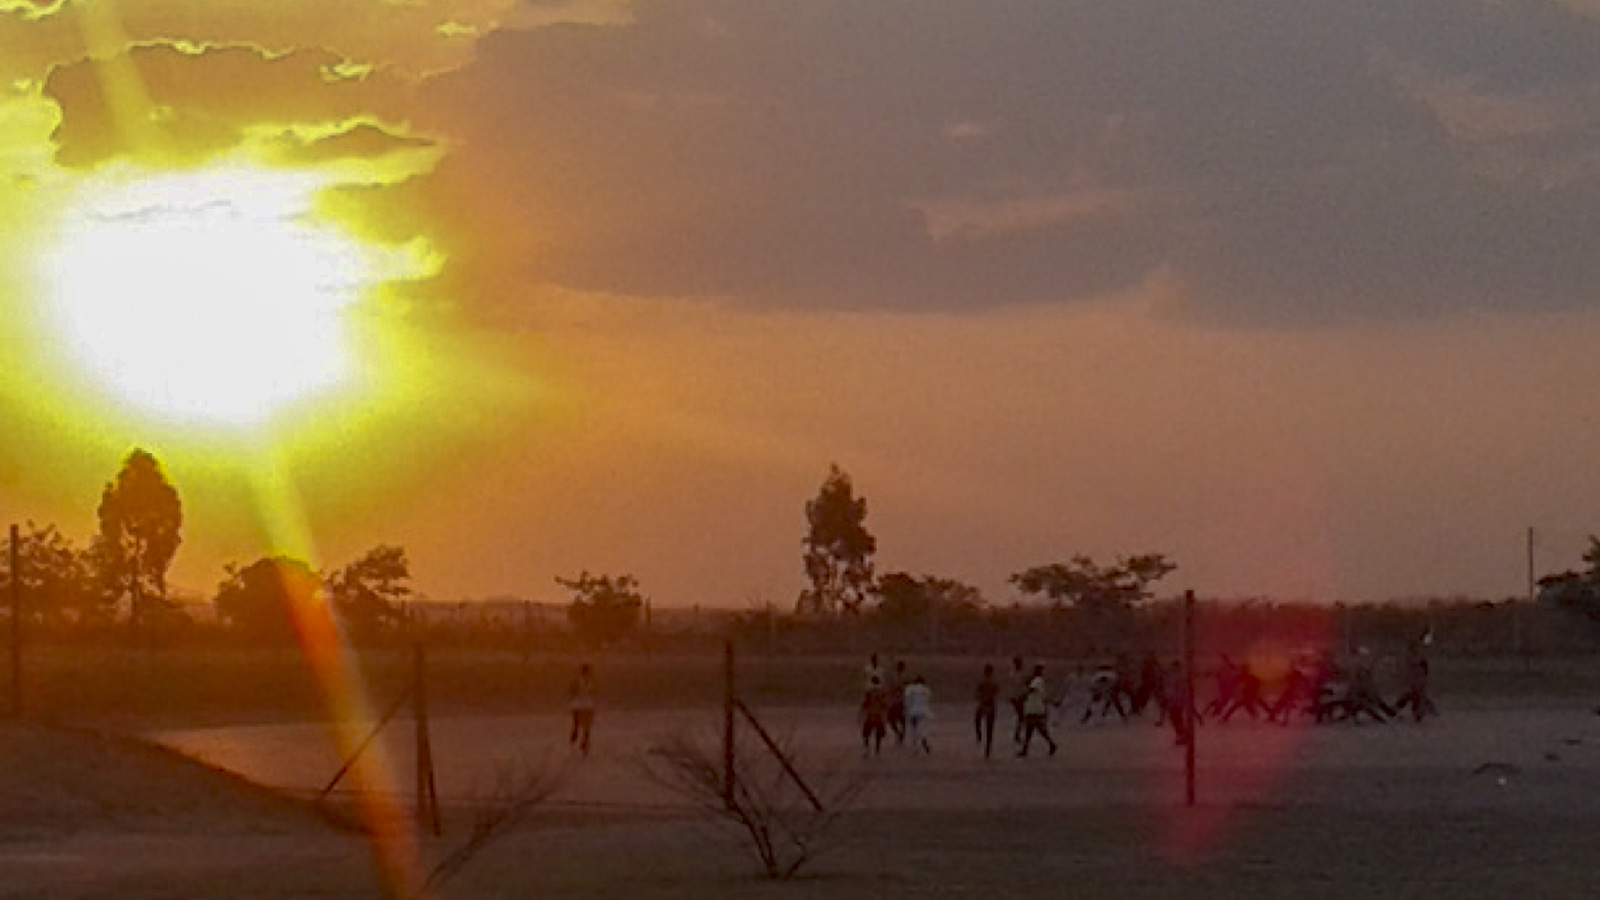 People playing football in Zambia at sunset